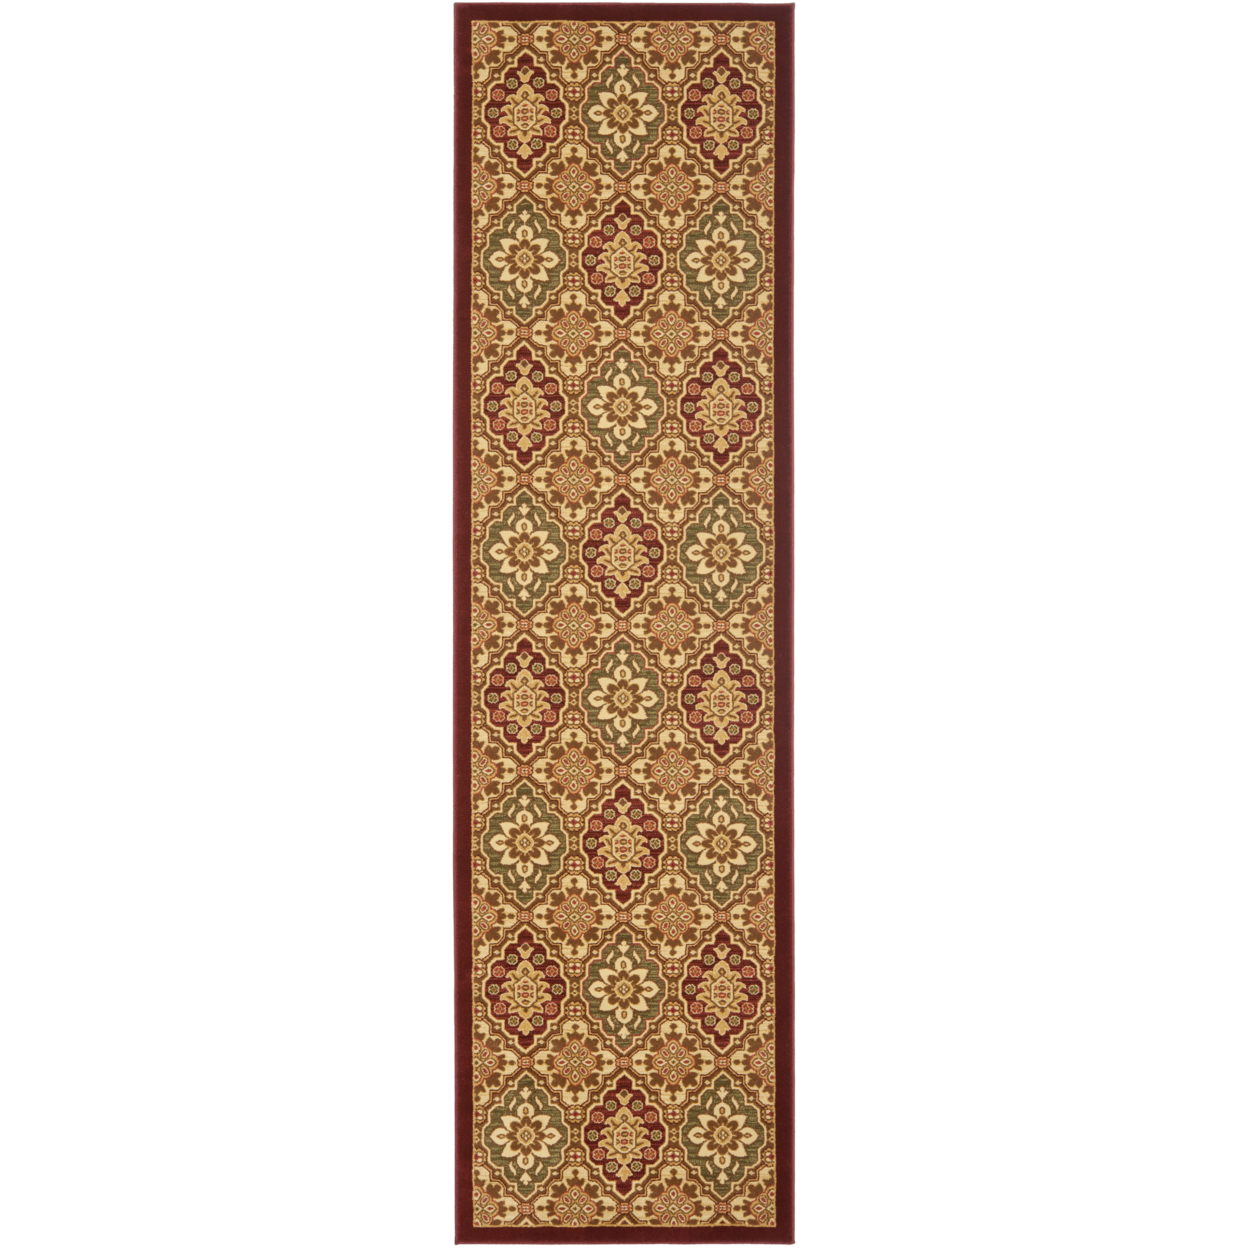 SAFAVIEH Treasures Collection TRE217-4012 Red / Ivory Rug - 2' 2 X 8'